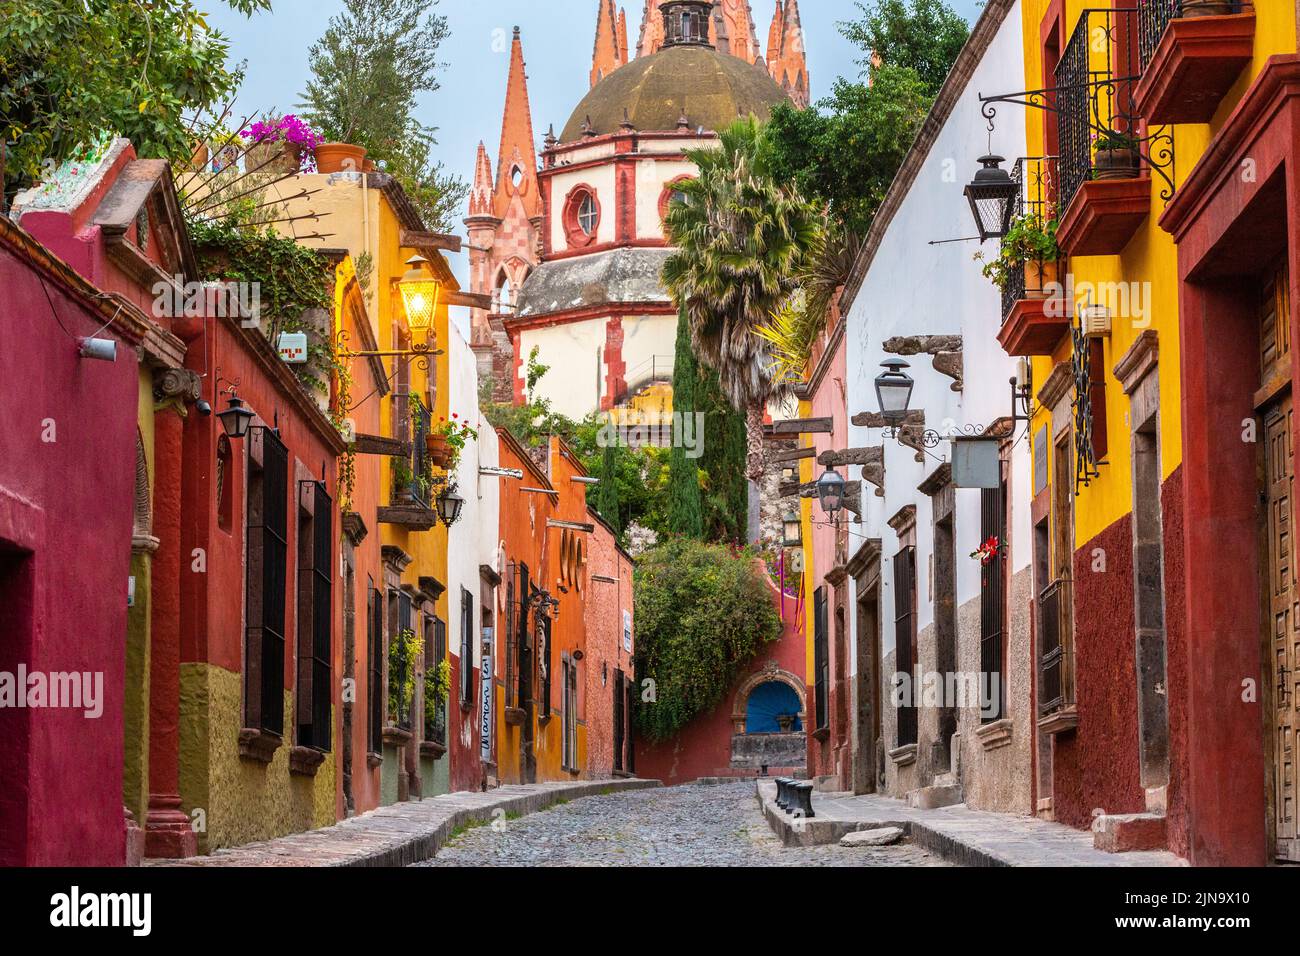 Early morning view of the cobblestone Calle Aldama and the original barque tower of Parroquia de San Miguel Arcangel in the historic city center of San Miguel de Allende, Mexico. Stock Photo